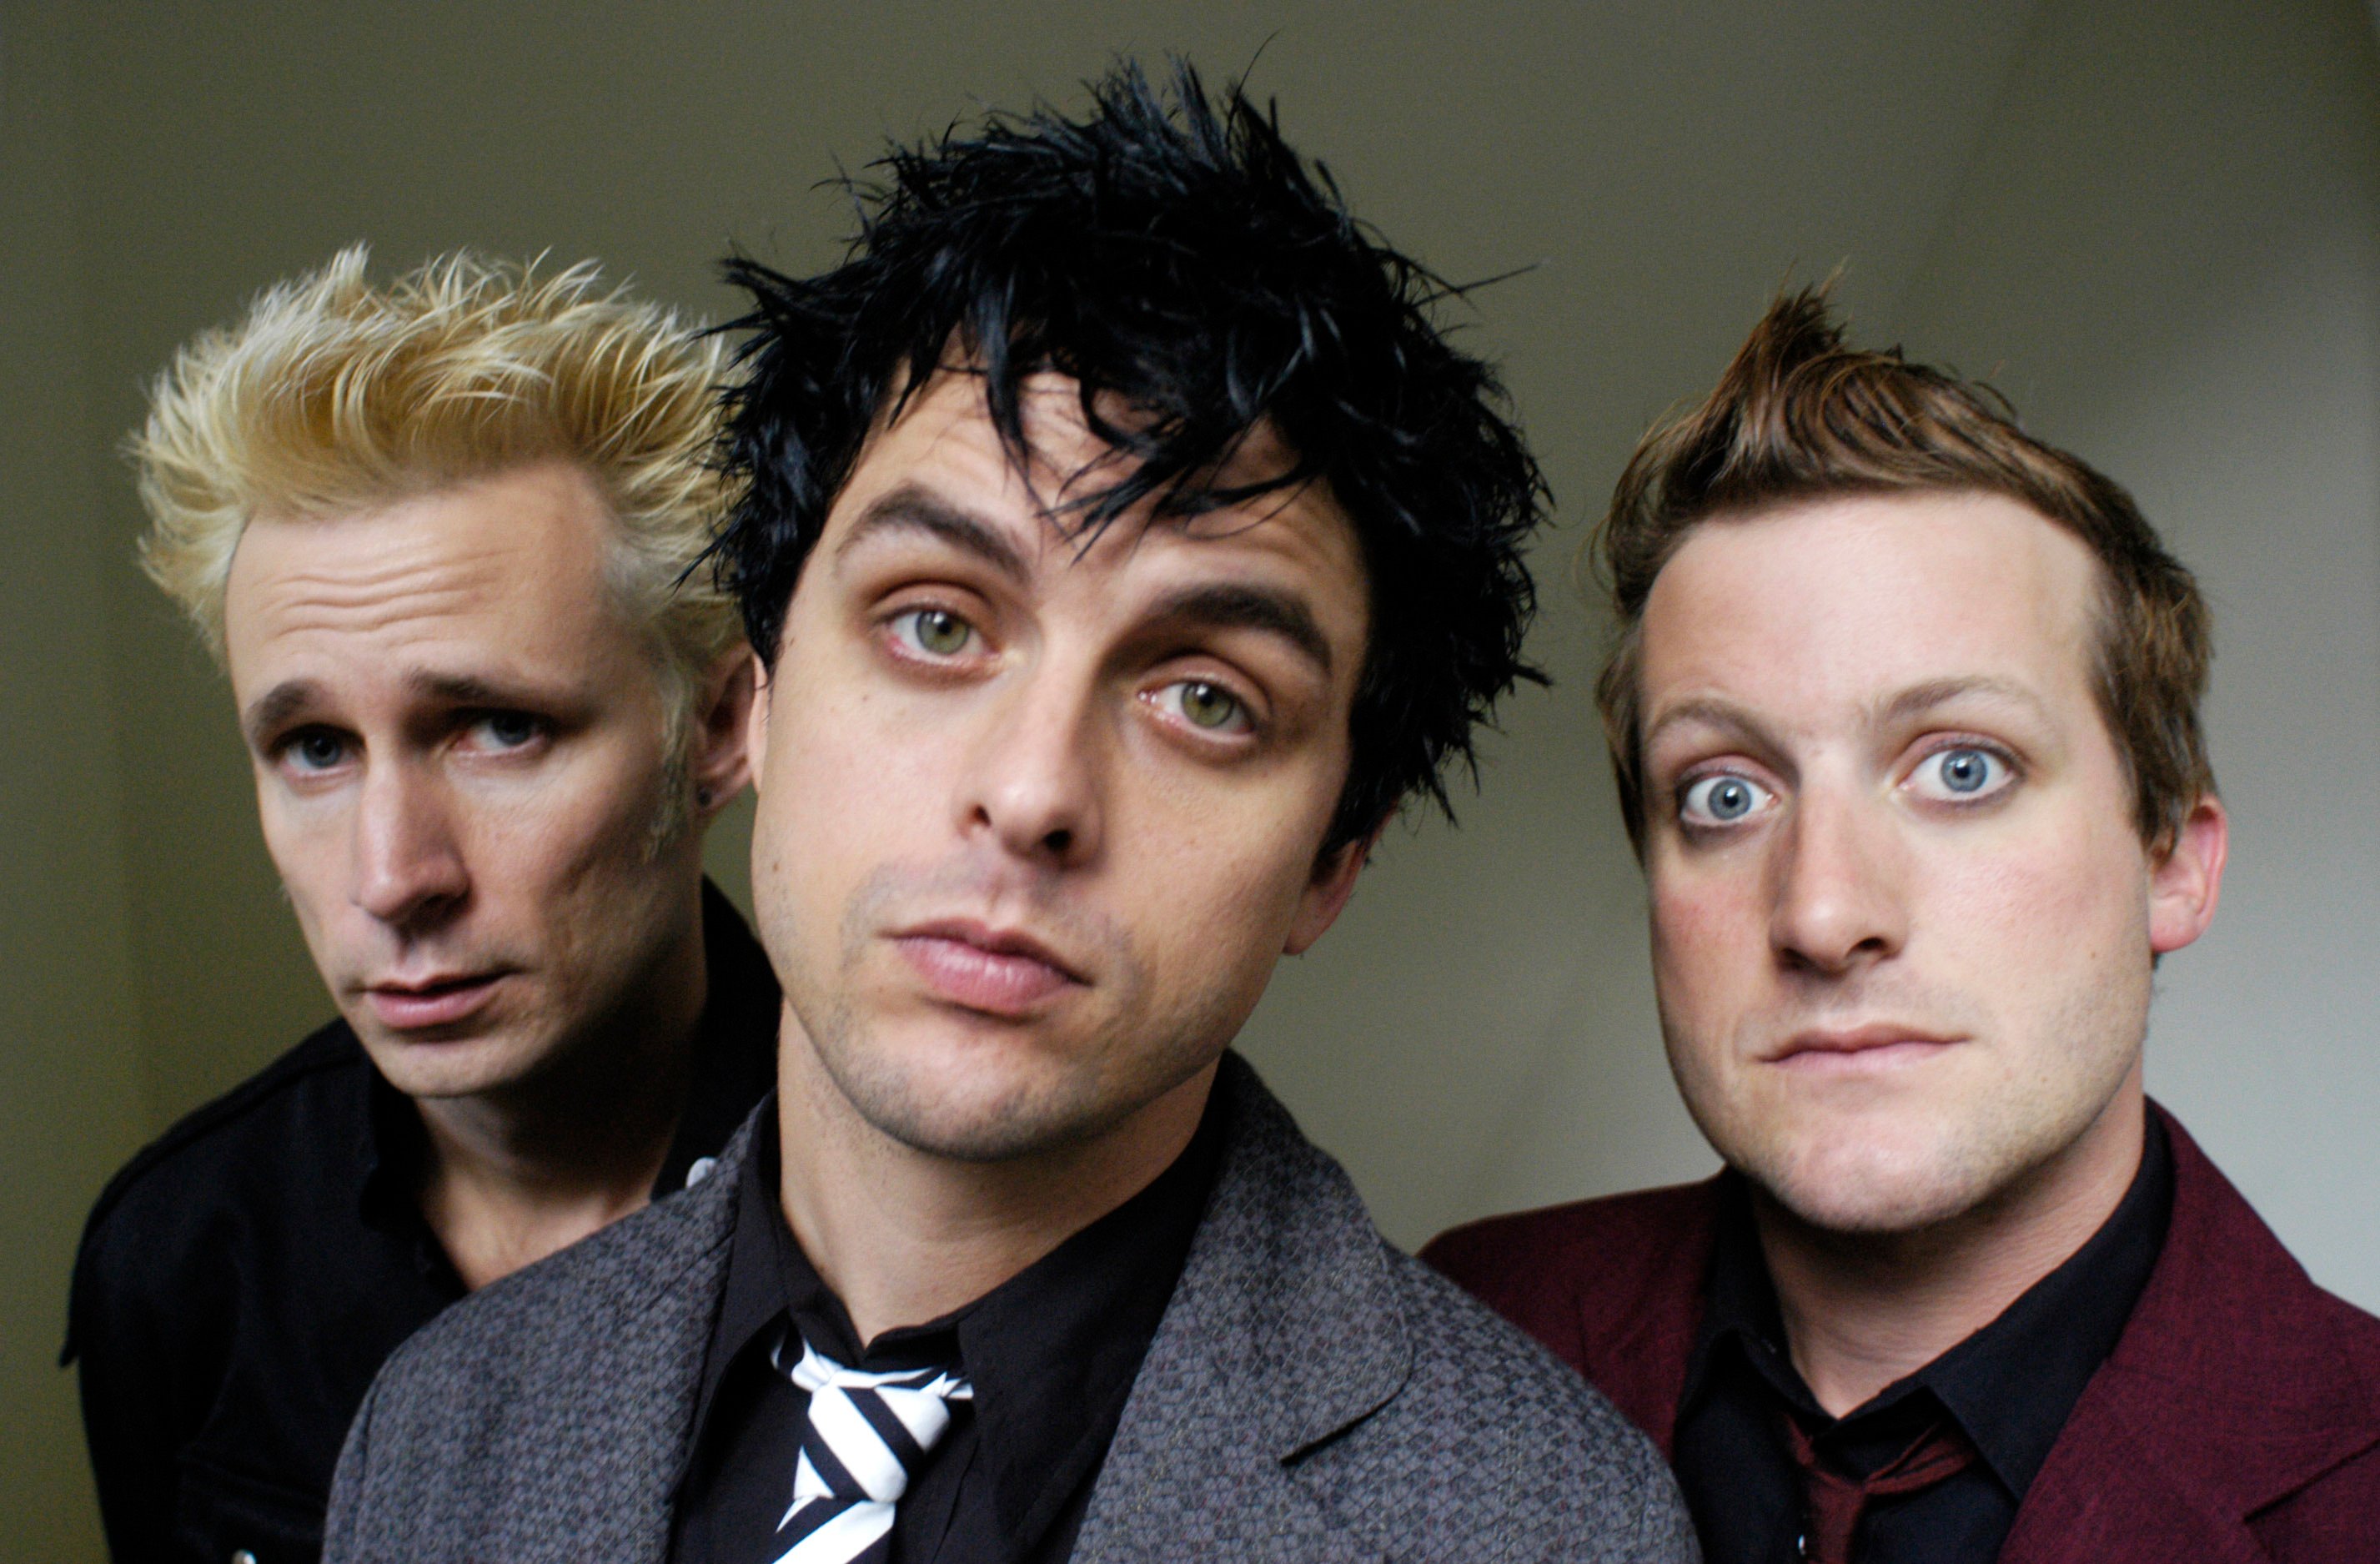 Green Day's Mike Dirnt, Billie Joe Armstrong, and Tré Cool with a grey background